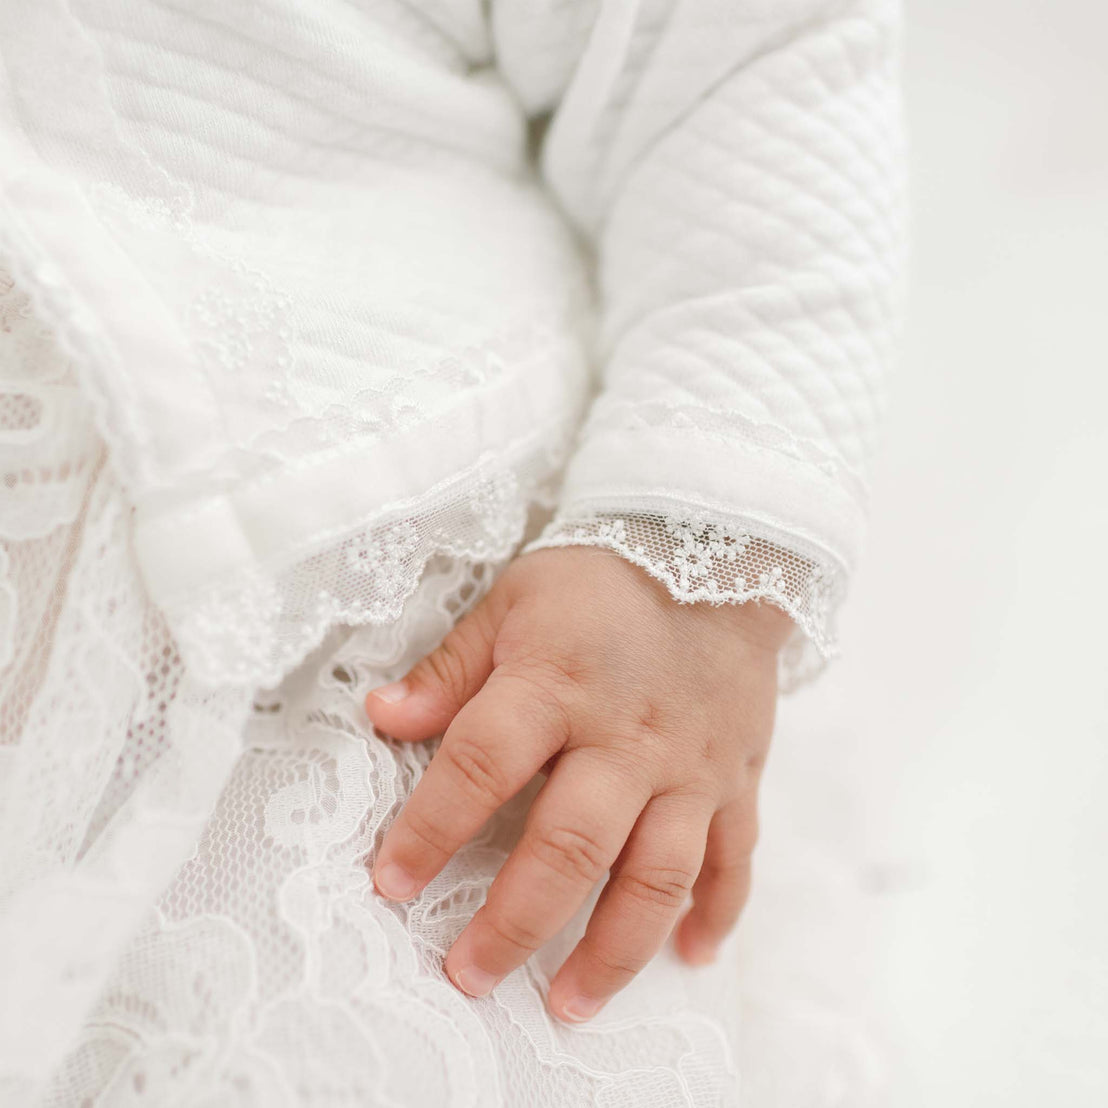 Close-up of a baby's hand gently resting on a Victoria Quilted Cotton Sweater, capturing the delicate, soft skin and tiny fingers.